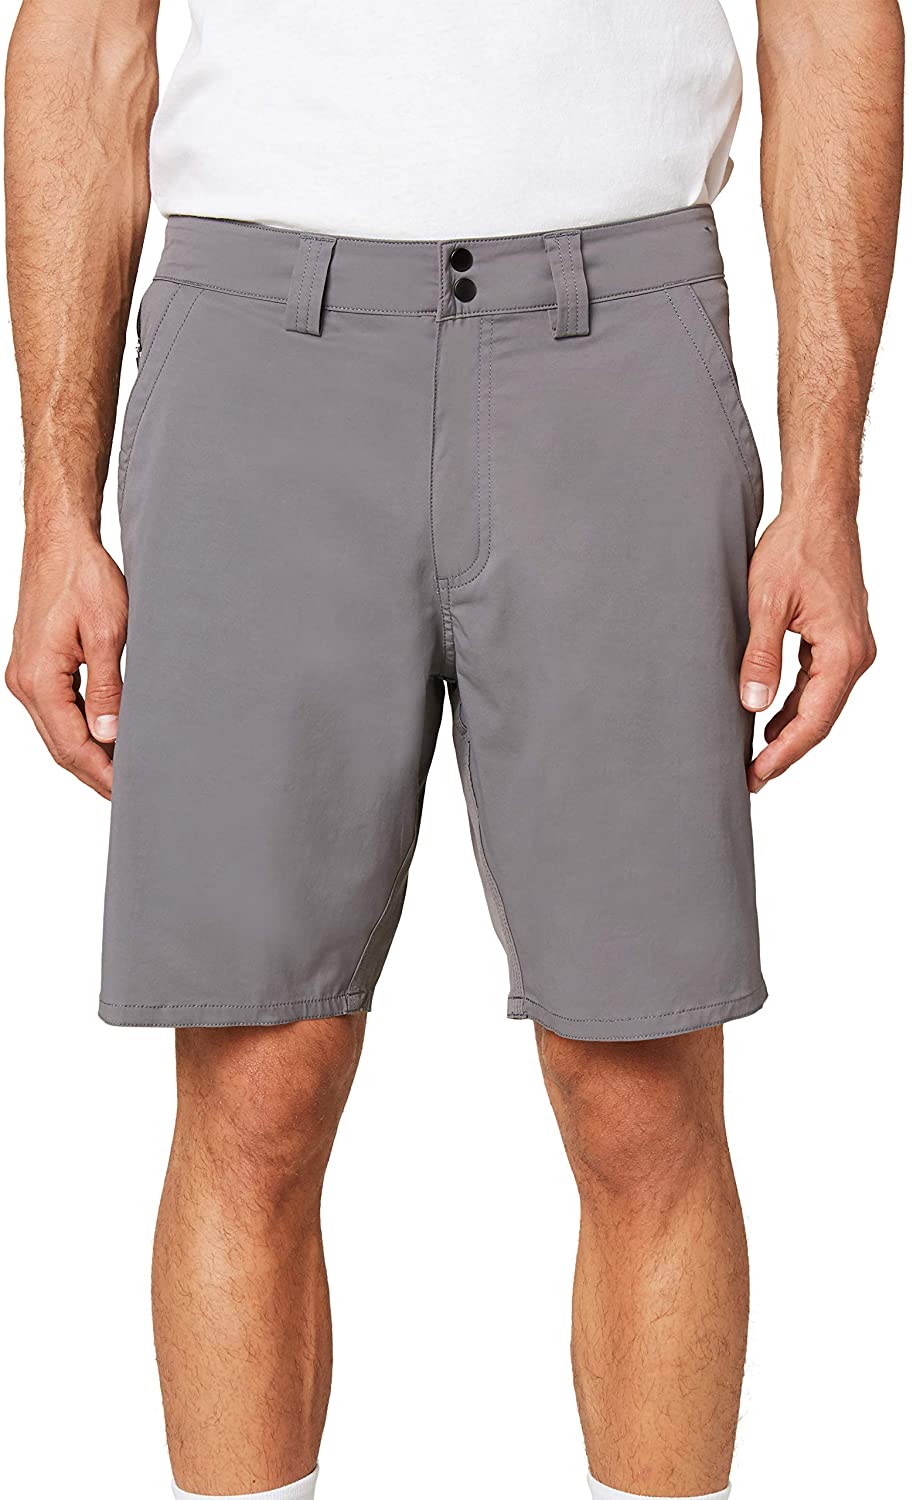 19 Inch Outseam Mid-Length Short ONEILL Mens Water Resistant Hybrid Stretch Walk Short 